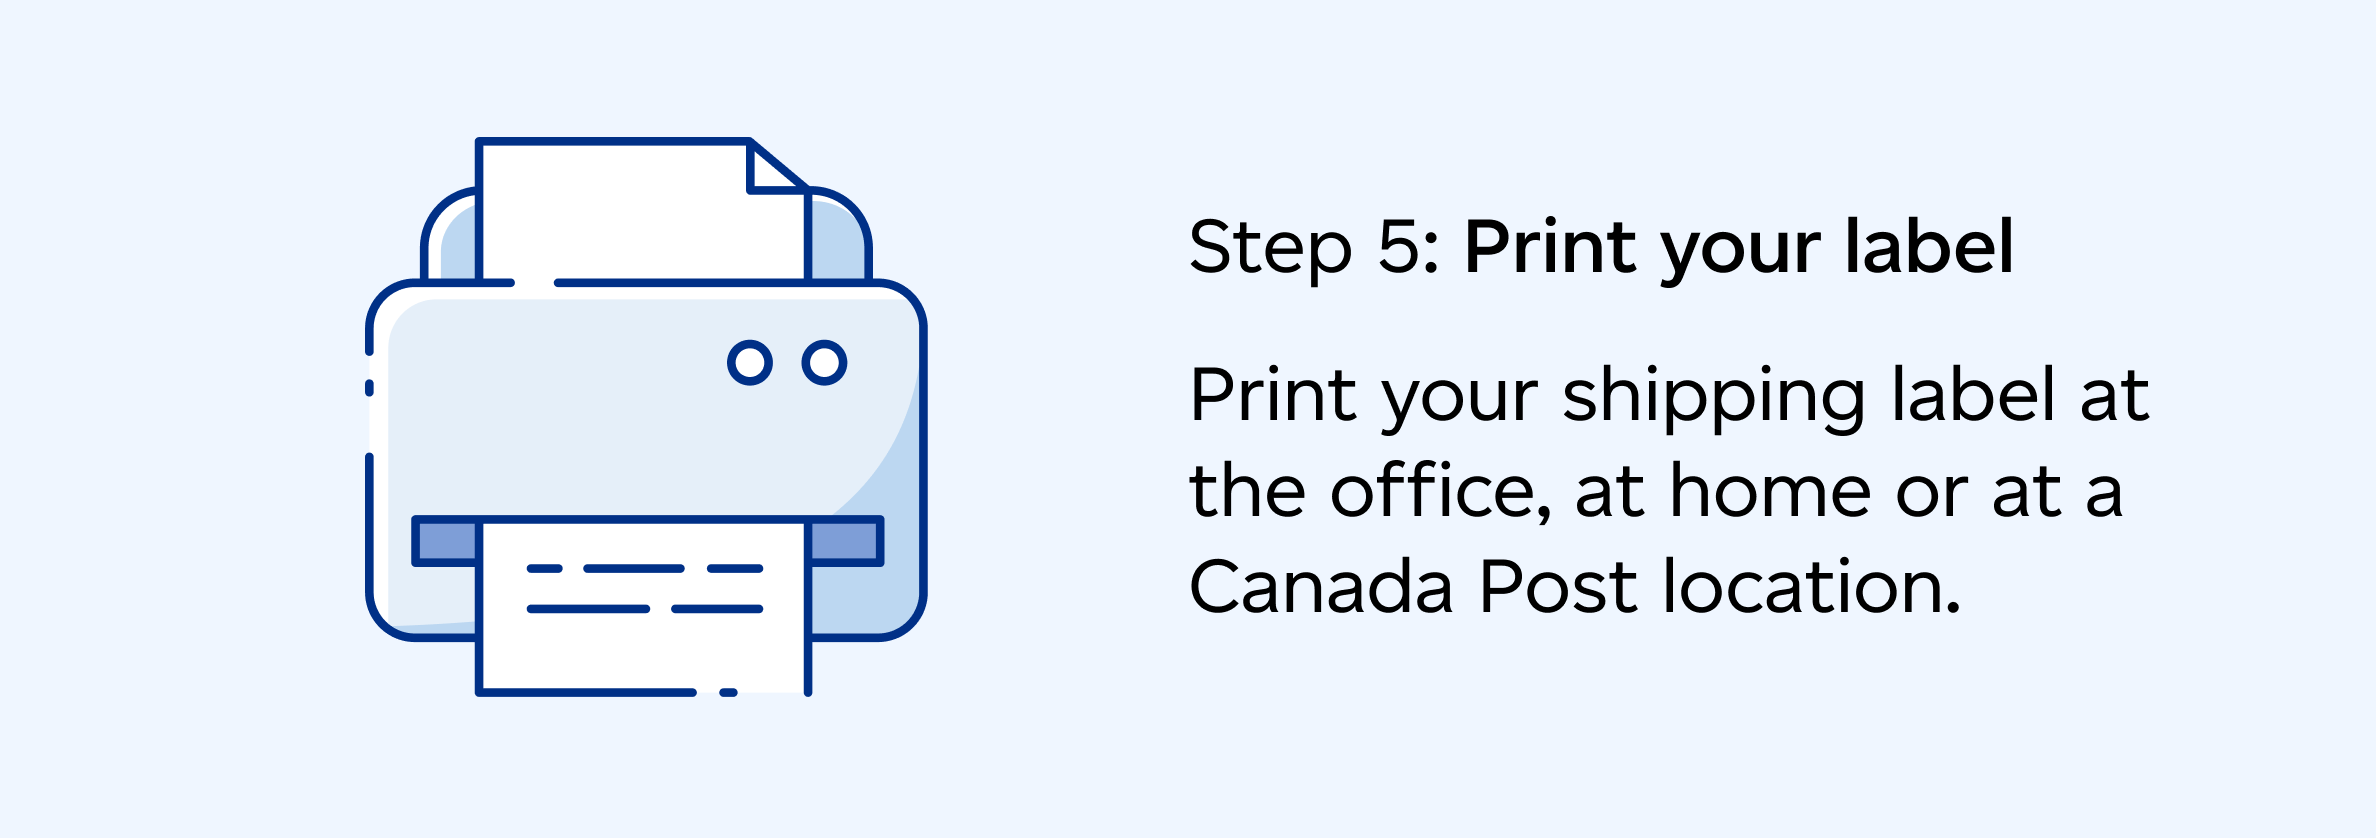 Step 5: Print your shipping label at the office, at home or at a Canada Post location.